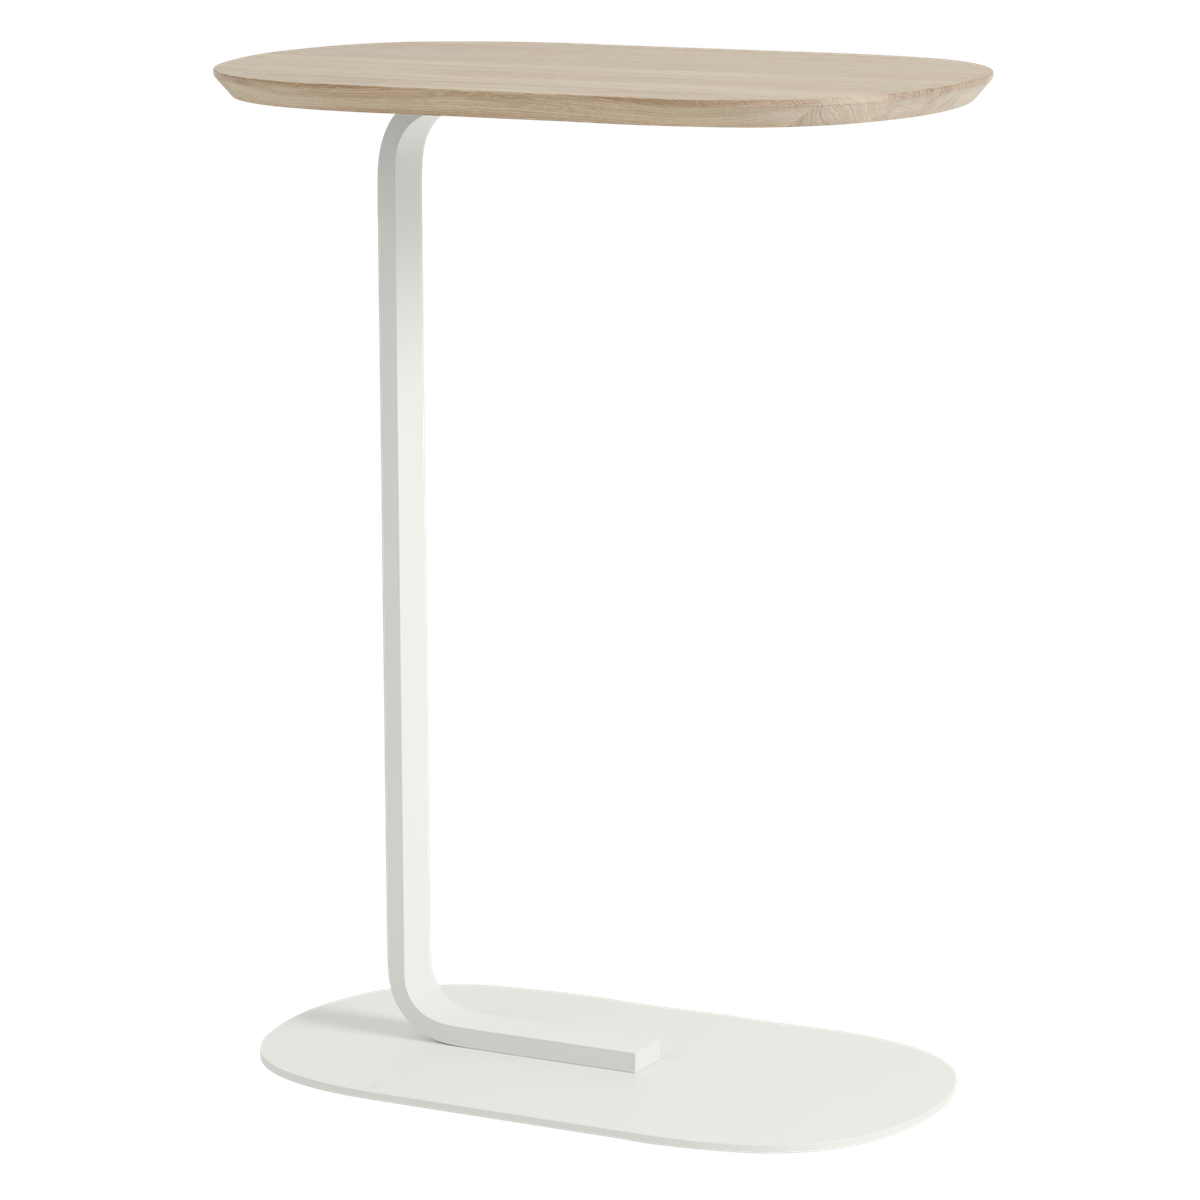 H73,5cm - solid oak/off white - Relate side table